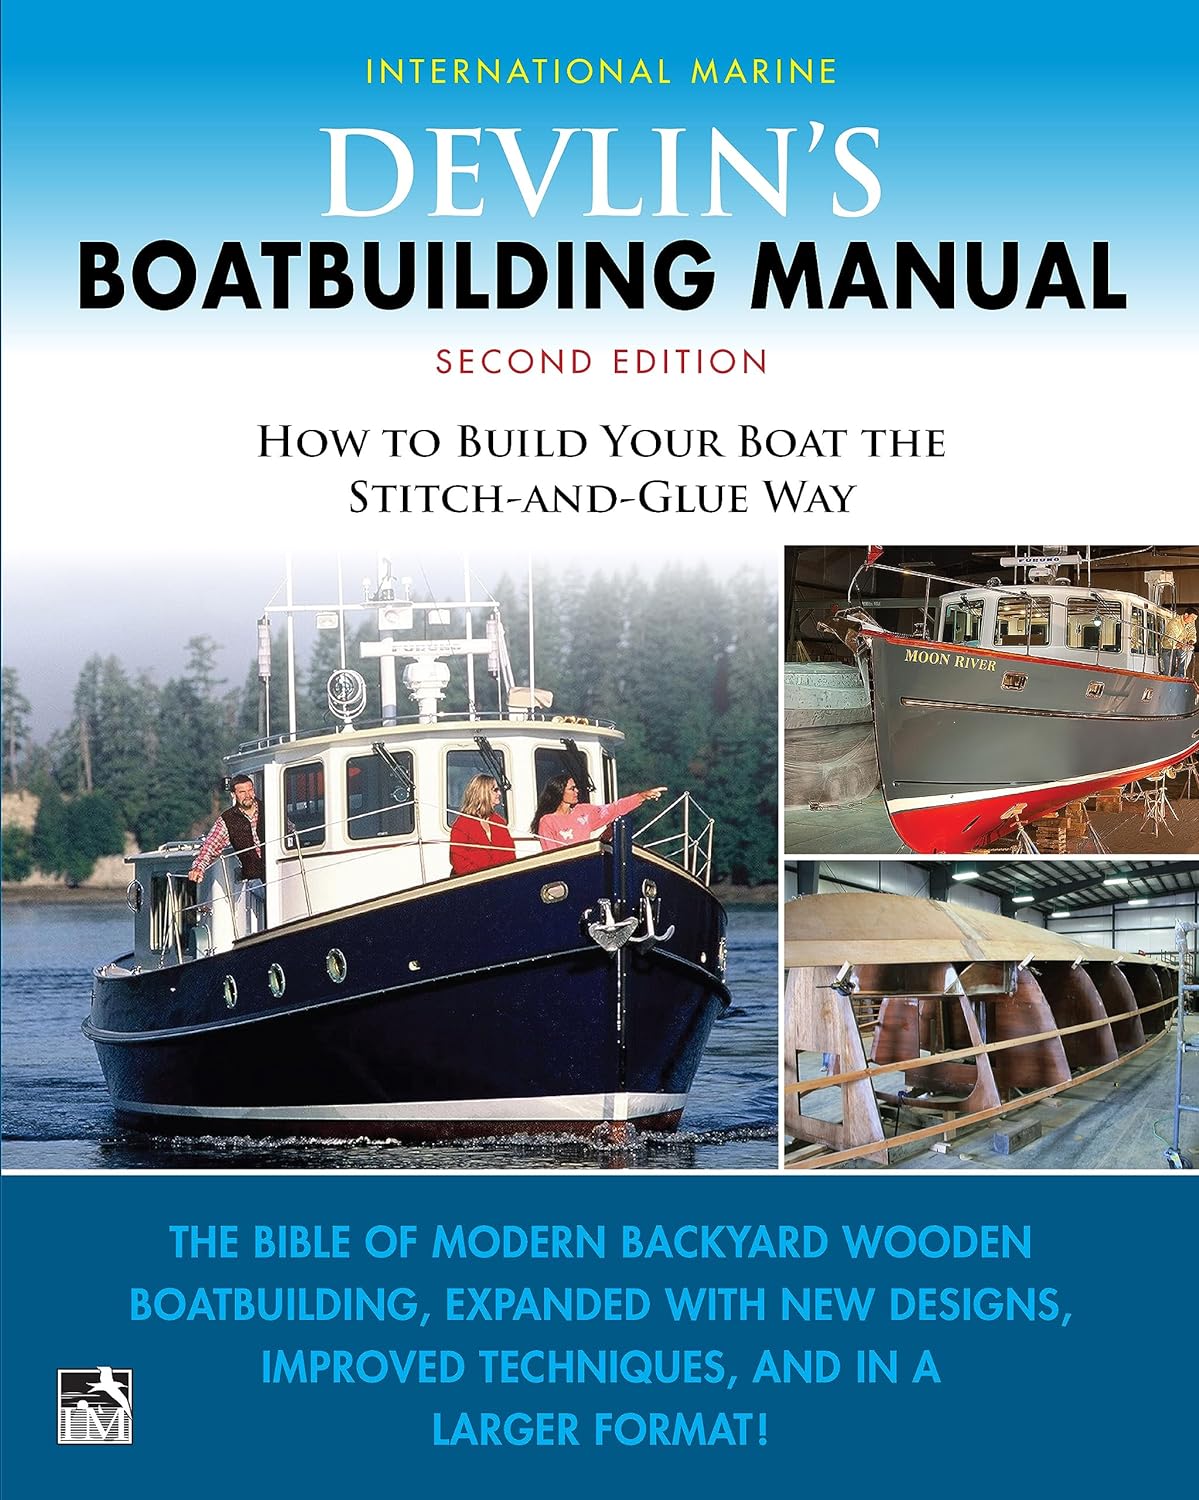 Devlin's Boat Building Manual: How to Build Your Boat the Stitch-and-Glue Way (2nd Edition)